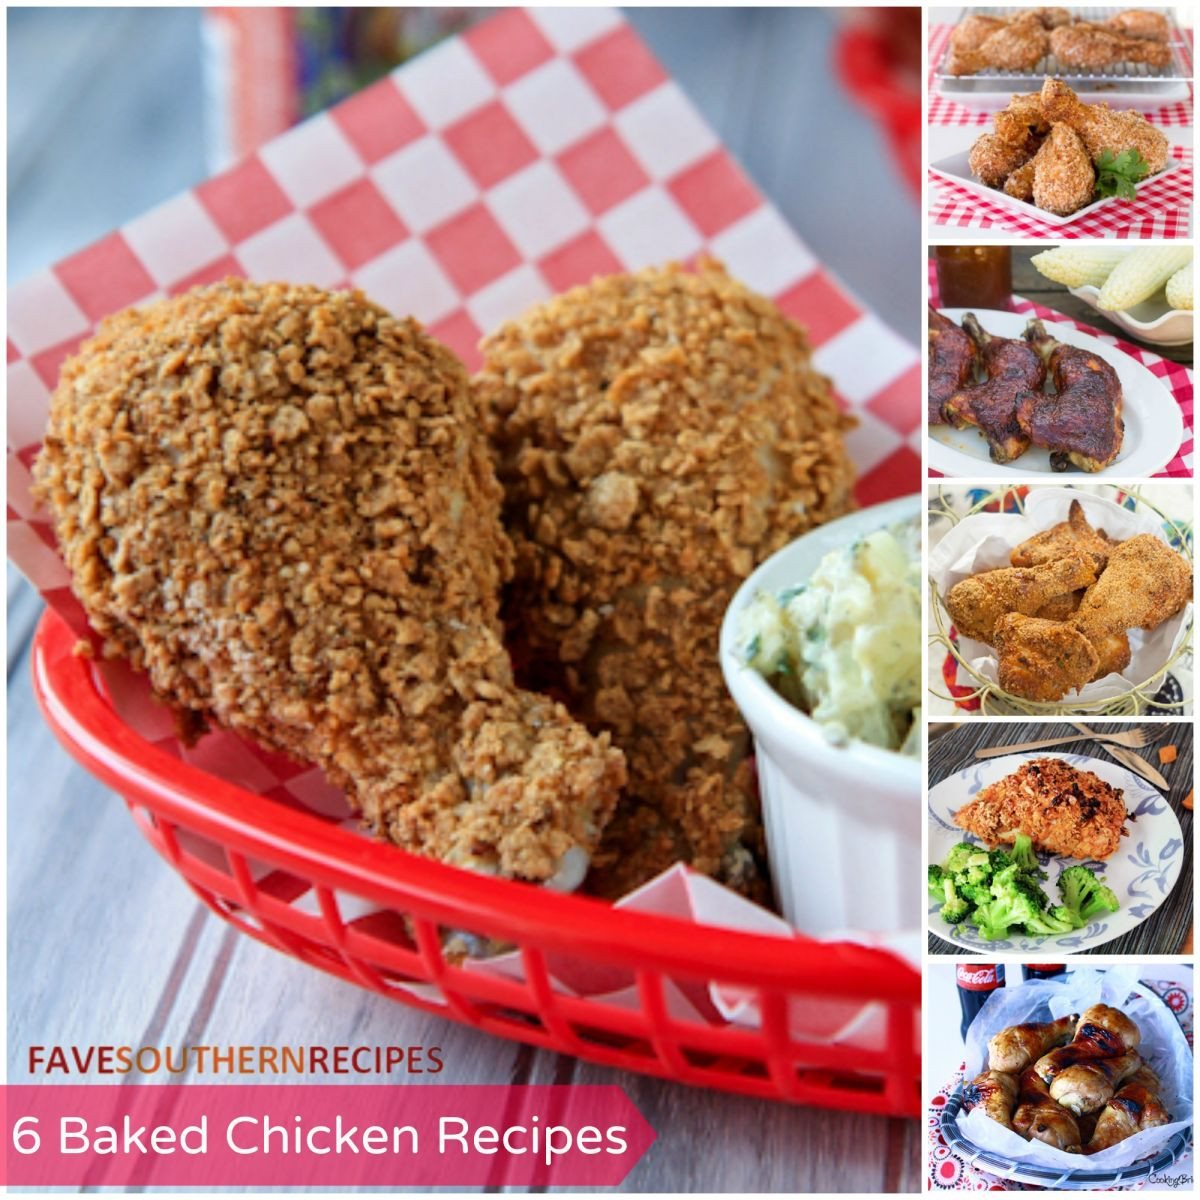 Healthy Dinner Ideas With Chicken
 Healthy Meal Ideas 6 Baked Chicken Recipes